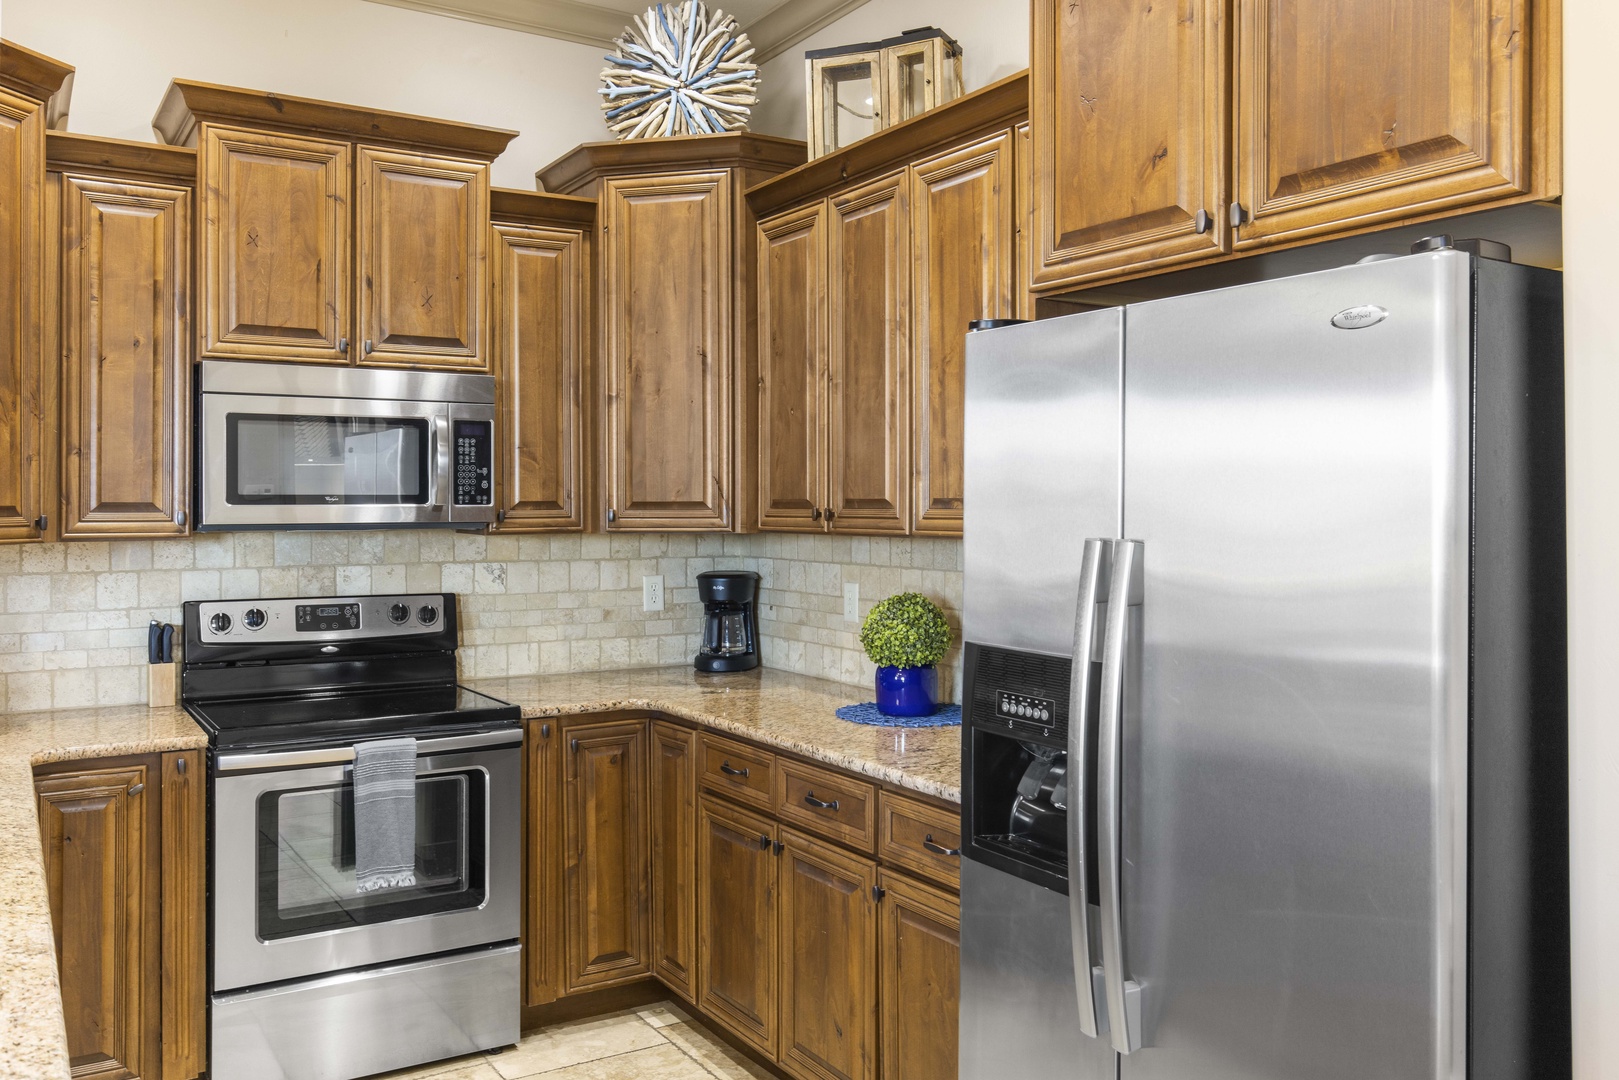 The open, updated kitchen is spacious & offers all the comforts of home